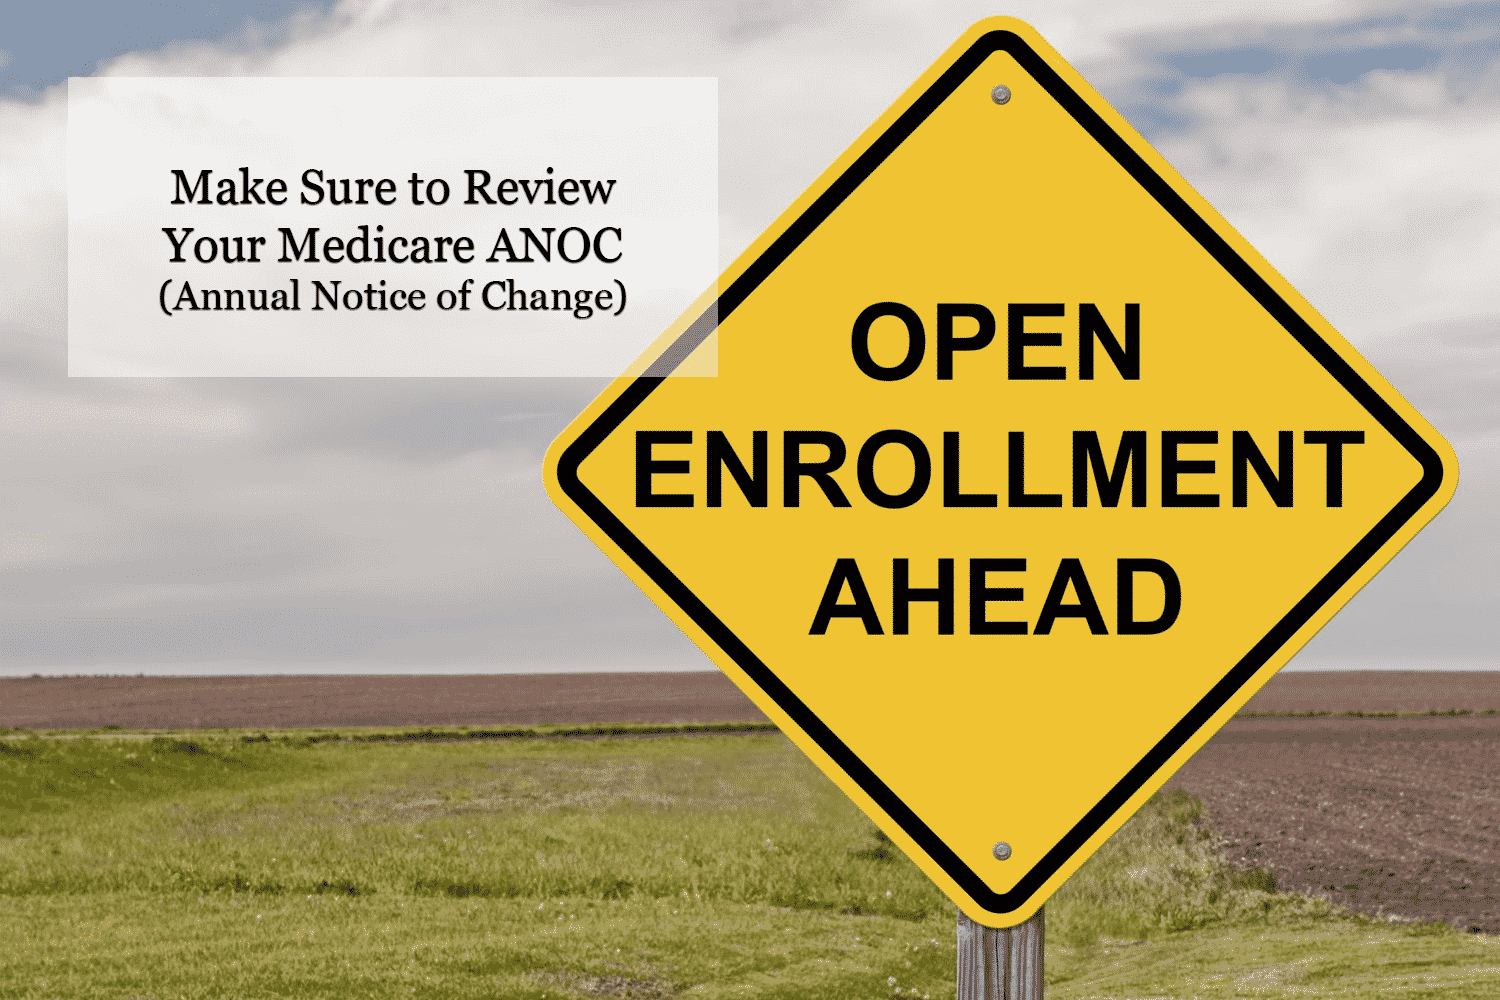 Make Sure to Review Your Medicare ANOC (Annual Notice of Change)